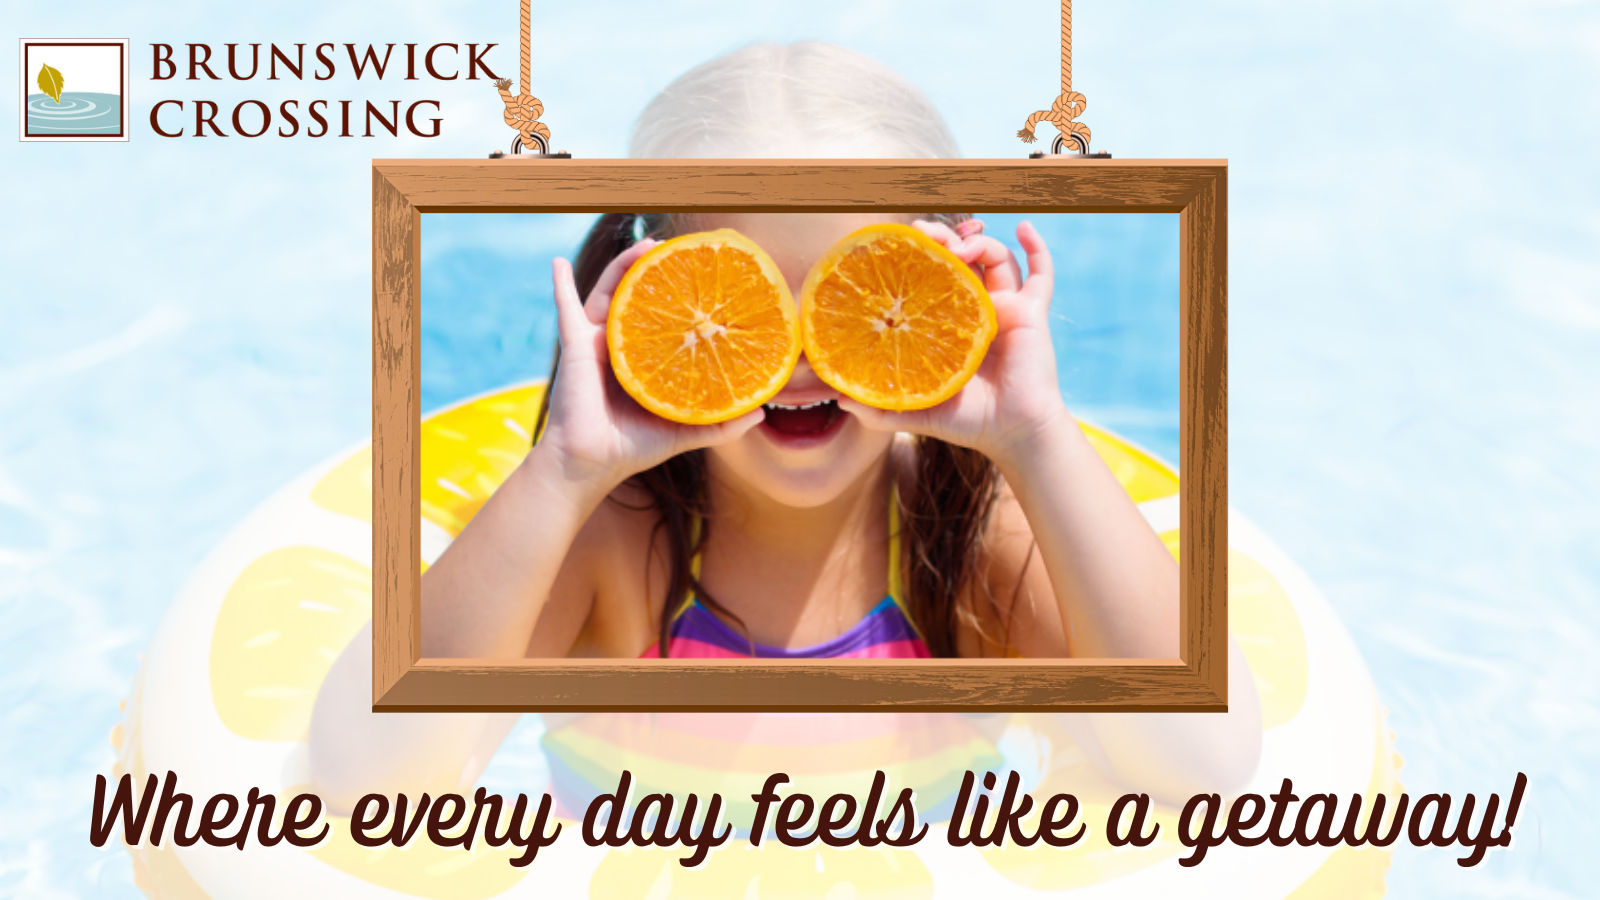 young girl swimming in pool float with oranges covering eyes in a picture frame with the Brunswick Crossing logo and campaign slogan 